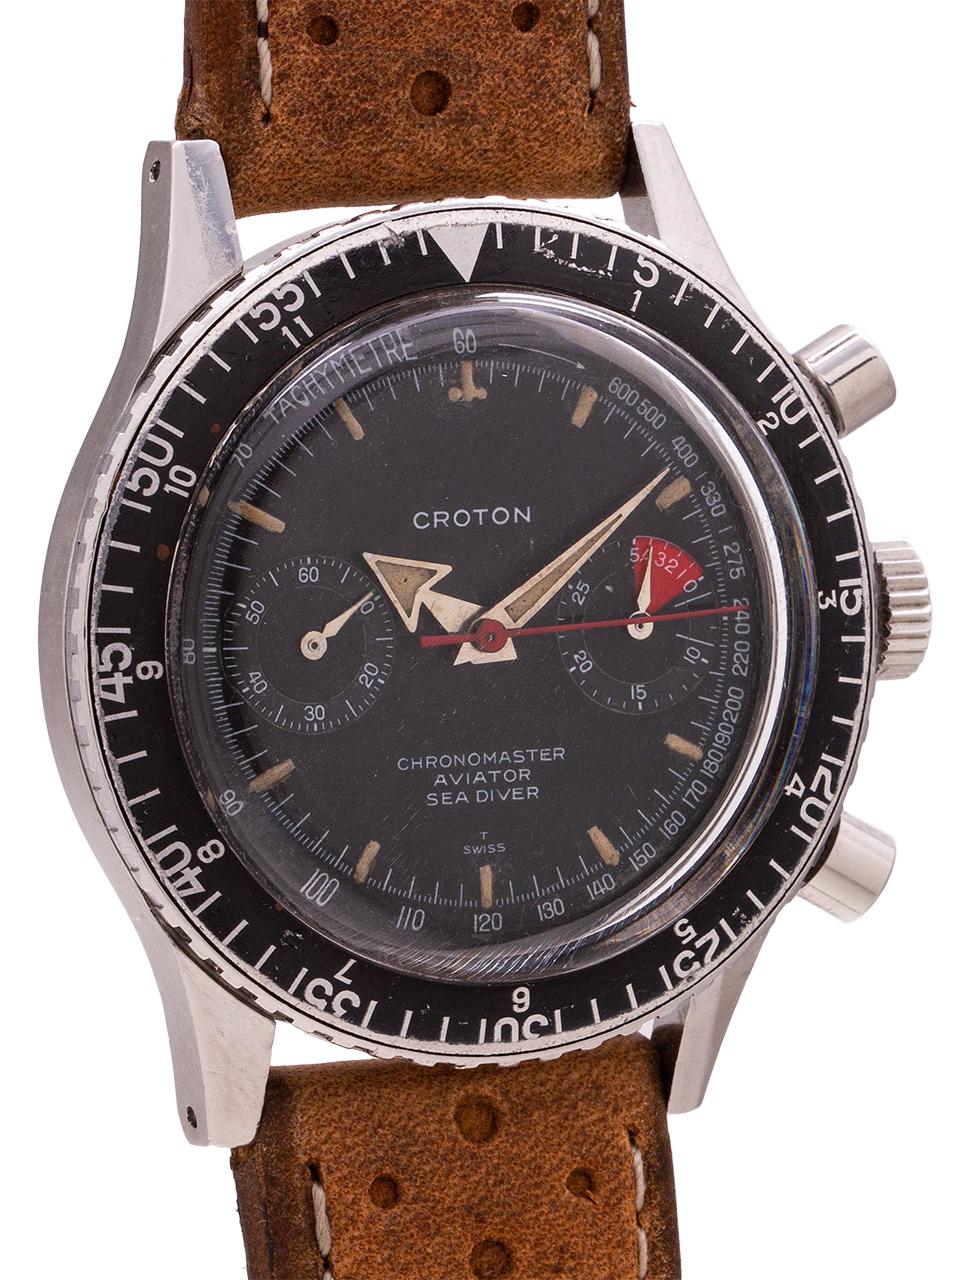 
Very nice example Croton 2 registers manual wind “Chronomaster Aviator Sea Diver” chronograph circa 1960’s. Featuring a 38 x 44mm case with extended lugs, screw down caseback, wide elapsed time bezel indicating hours and minutes, and with original